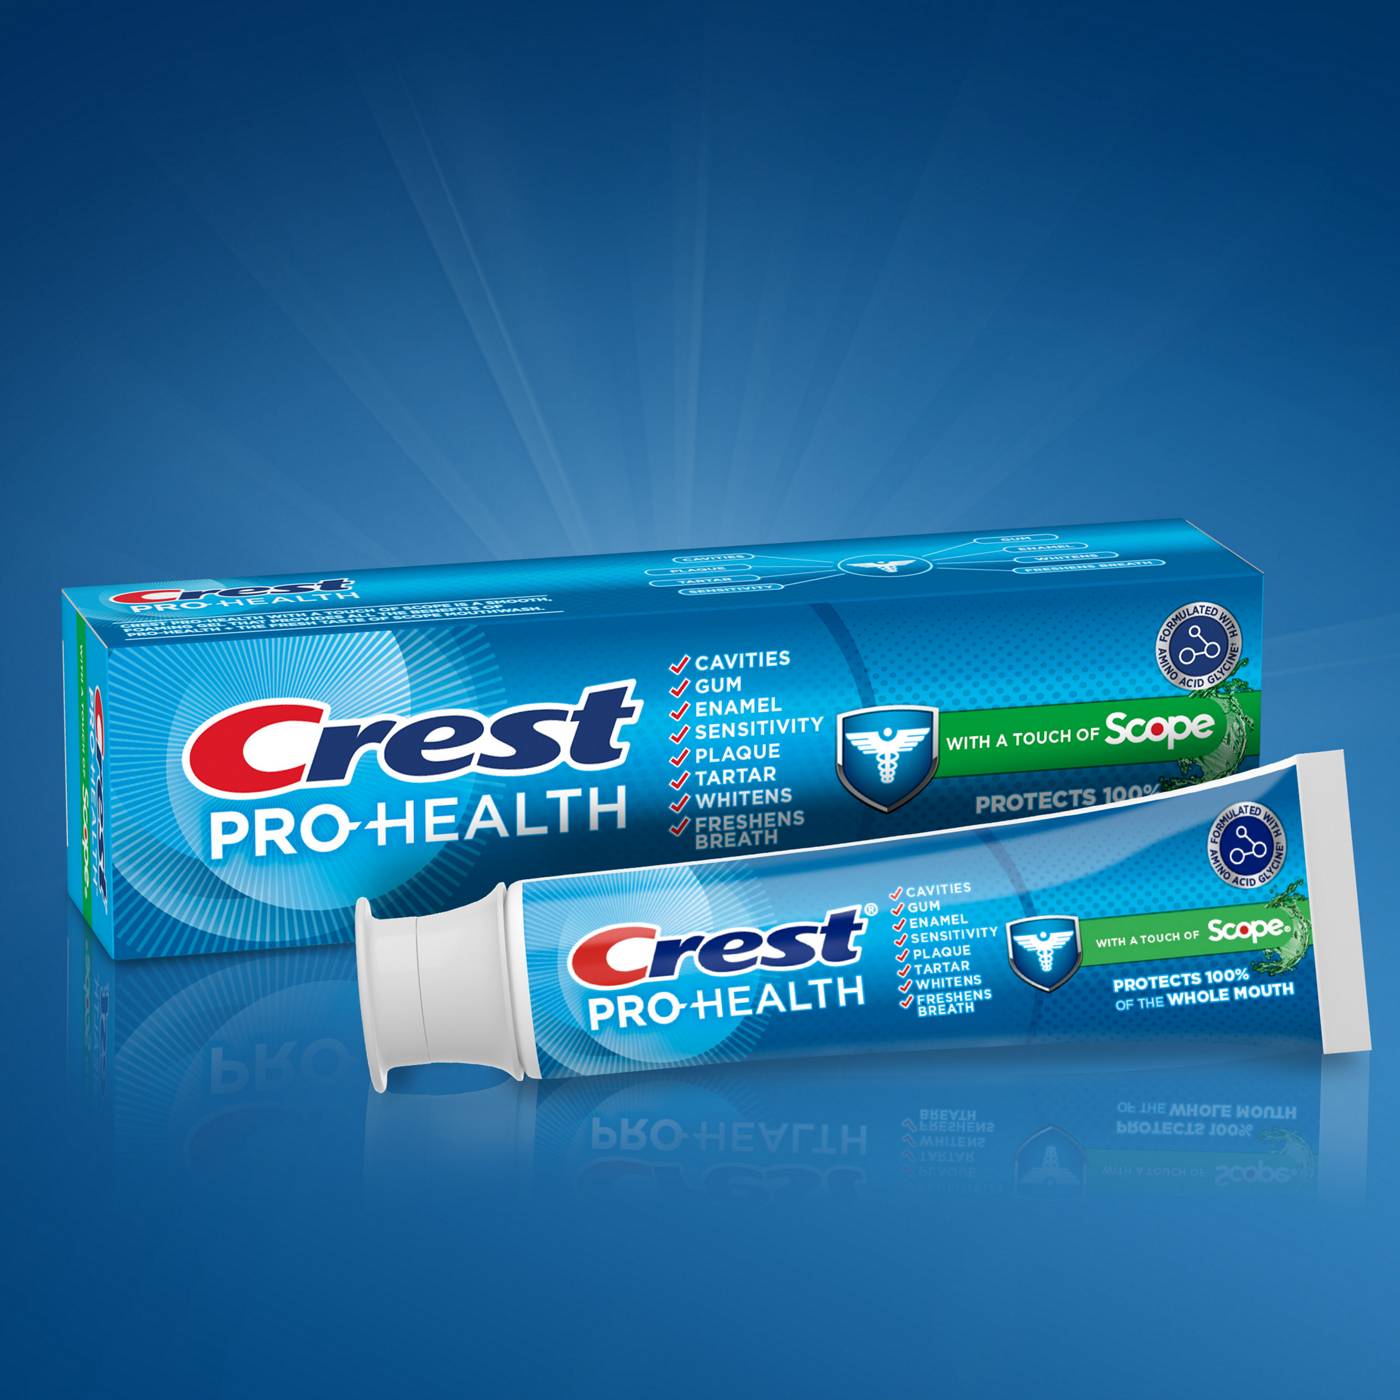 Crest Pro-Health with a Touch of Scope Gel Toothpaste; image 4 of 10